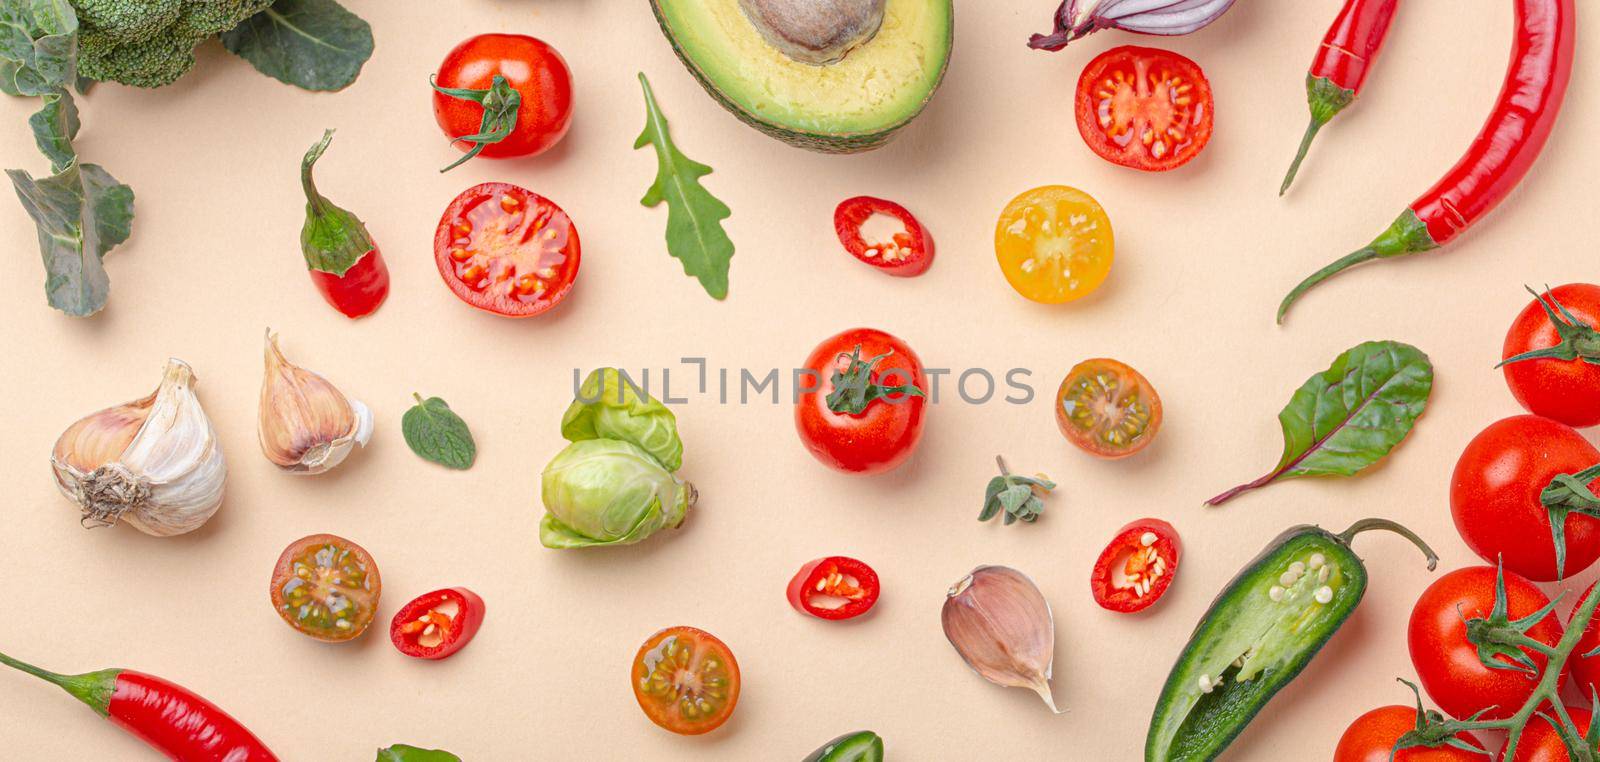 Creative cooking healthy organic food concept background made of colourful fruit and vegetables by its_al_dente